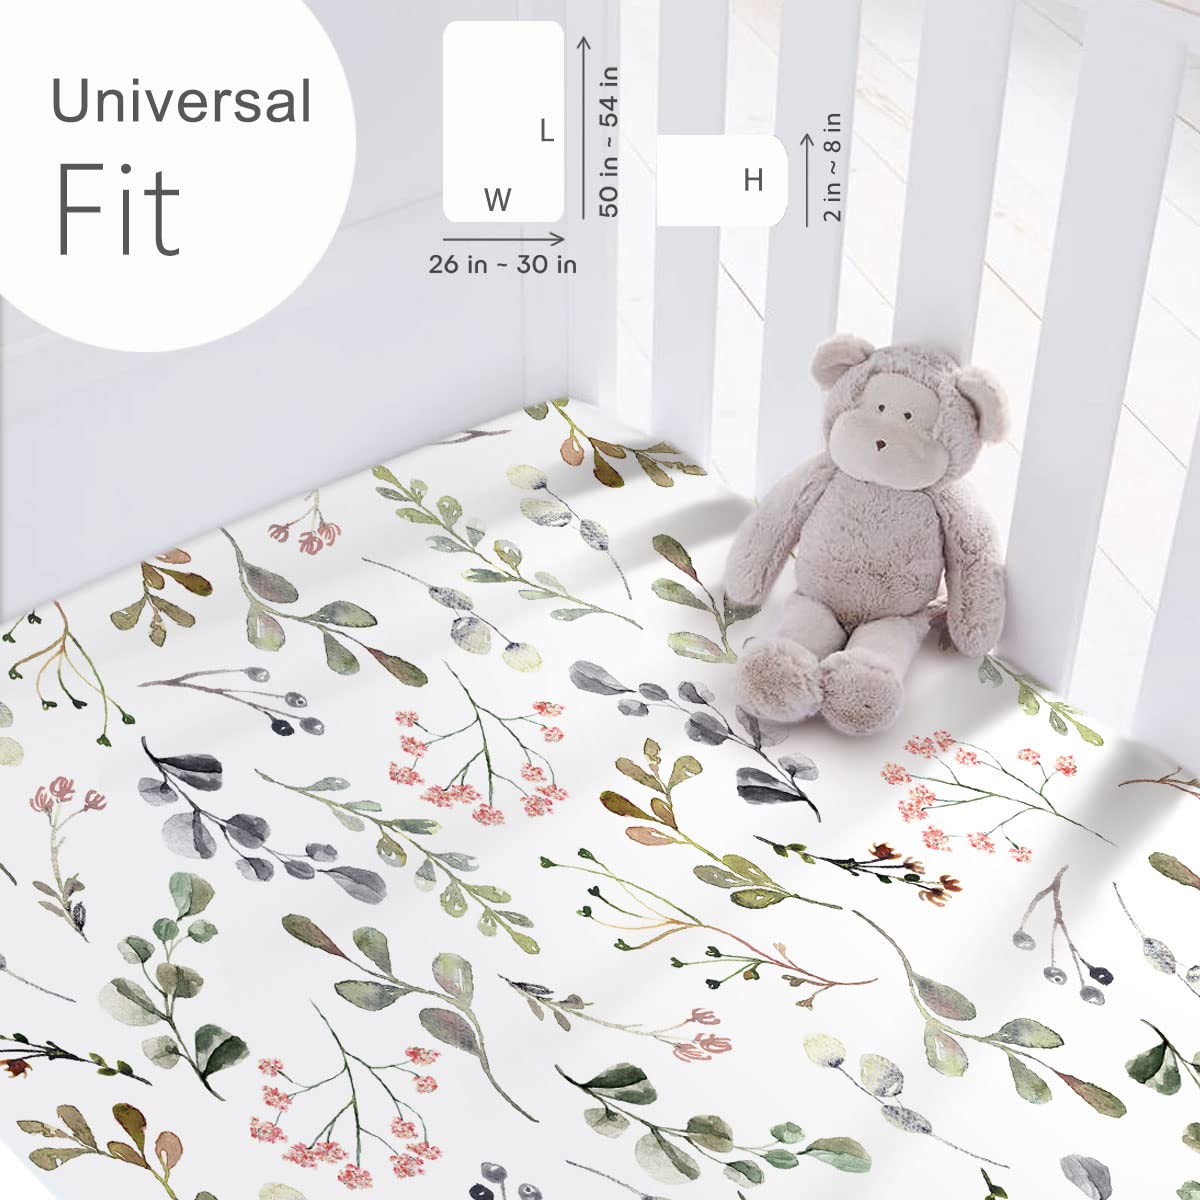 Stretch Ultra Soft Jersey Knit Fitted Crib Sheets Set 2 Pack，Fit All Standard Crib Mattress Pads Safe and Snug, Crib Fitted Sheet for Baby, Stylish African Savannah Animals Pattern